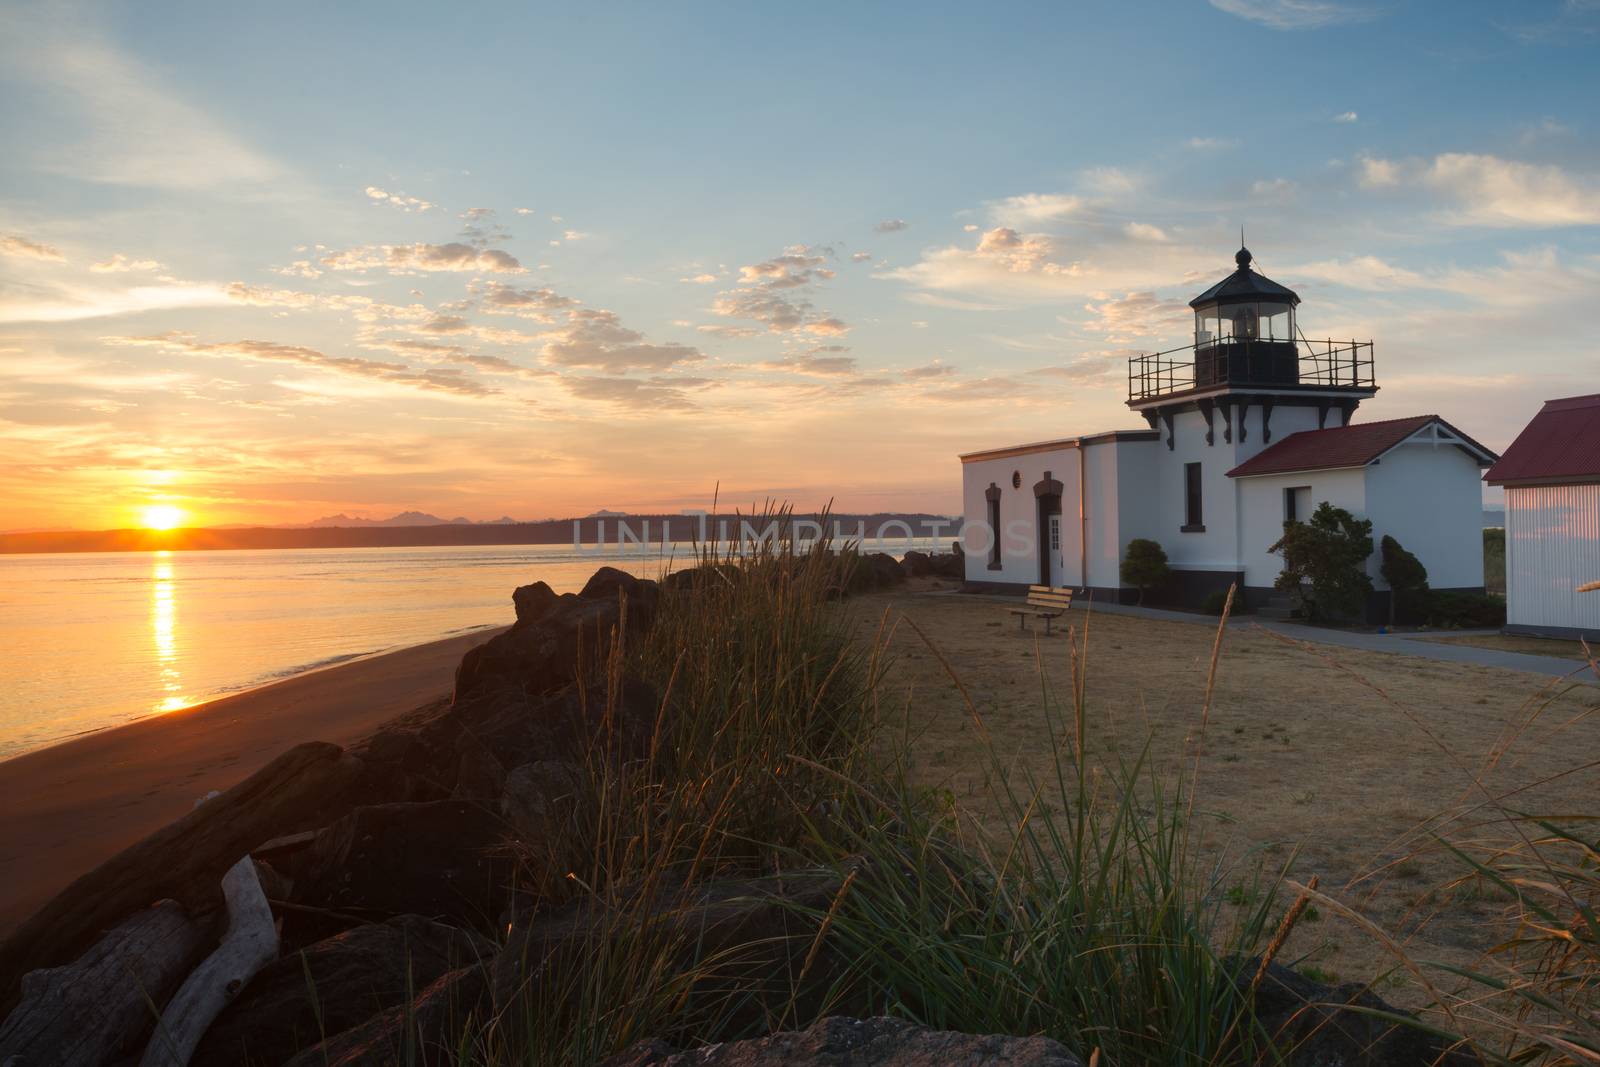 Bright Orange Sunrise Puget Sound Point No Point Lighthouse by ChrisBoswell